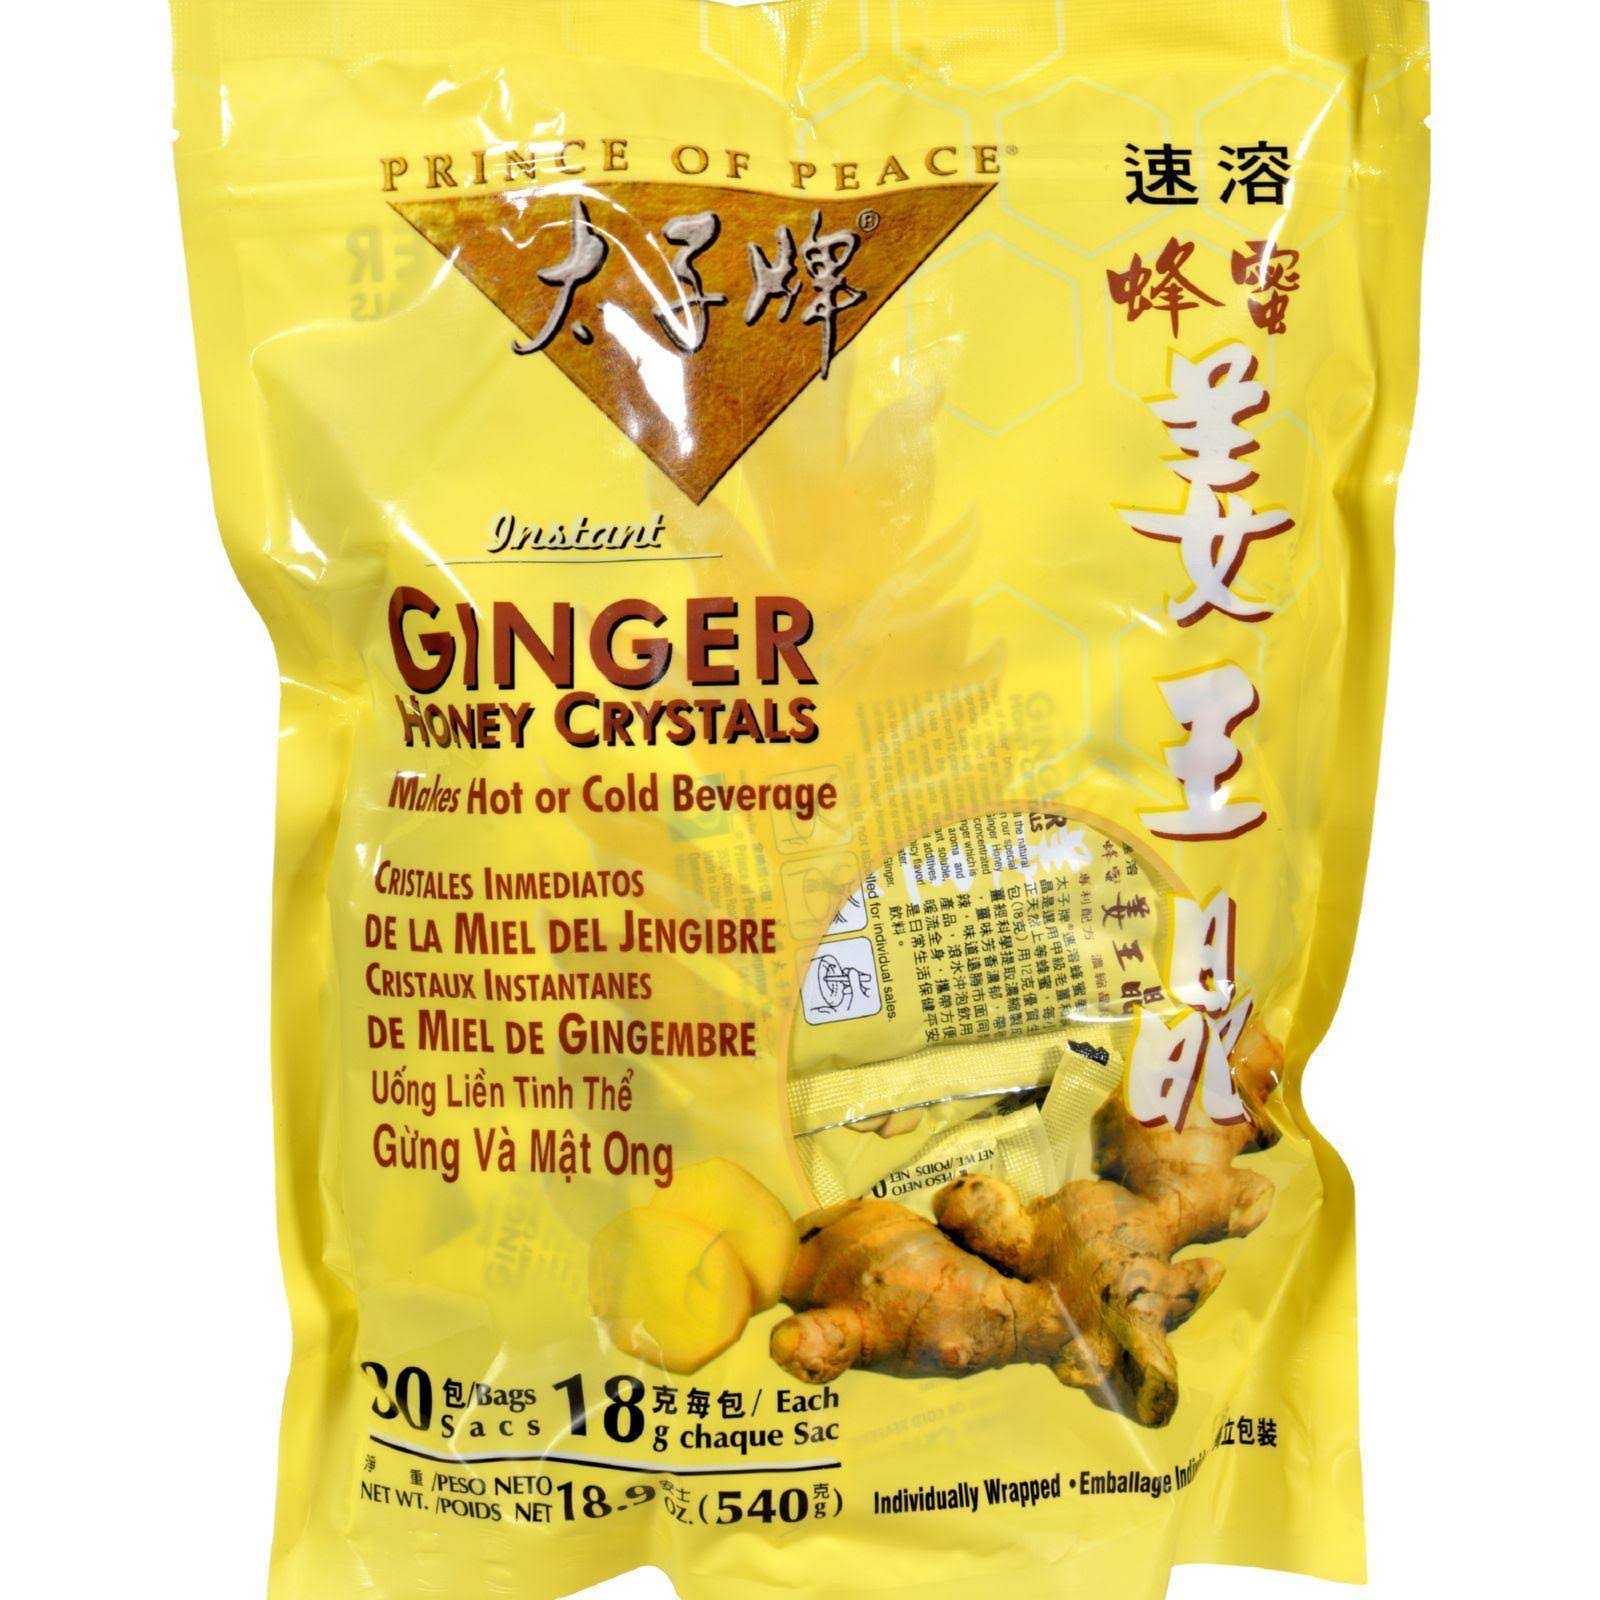 Prince of Peace Ginger Honey Crystals - 30 Packet, 540g